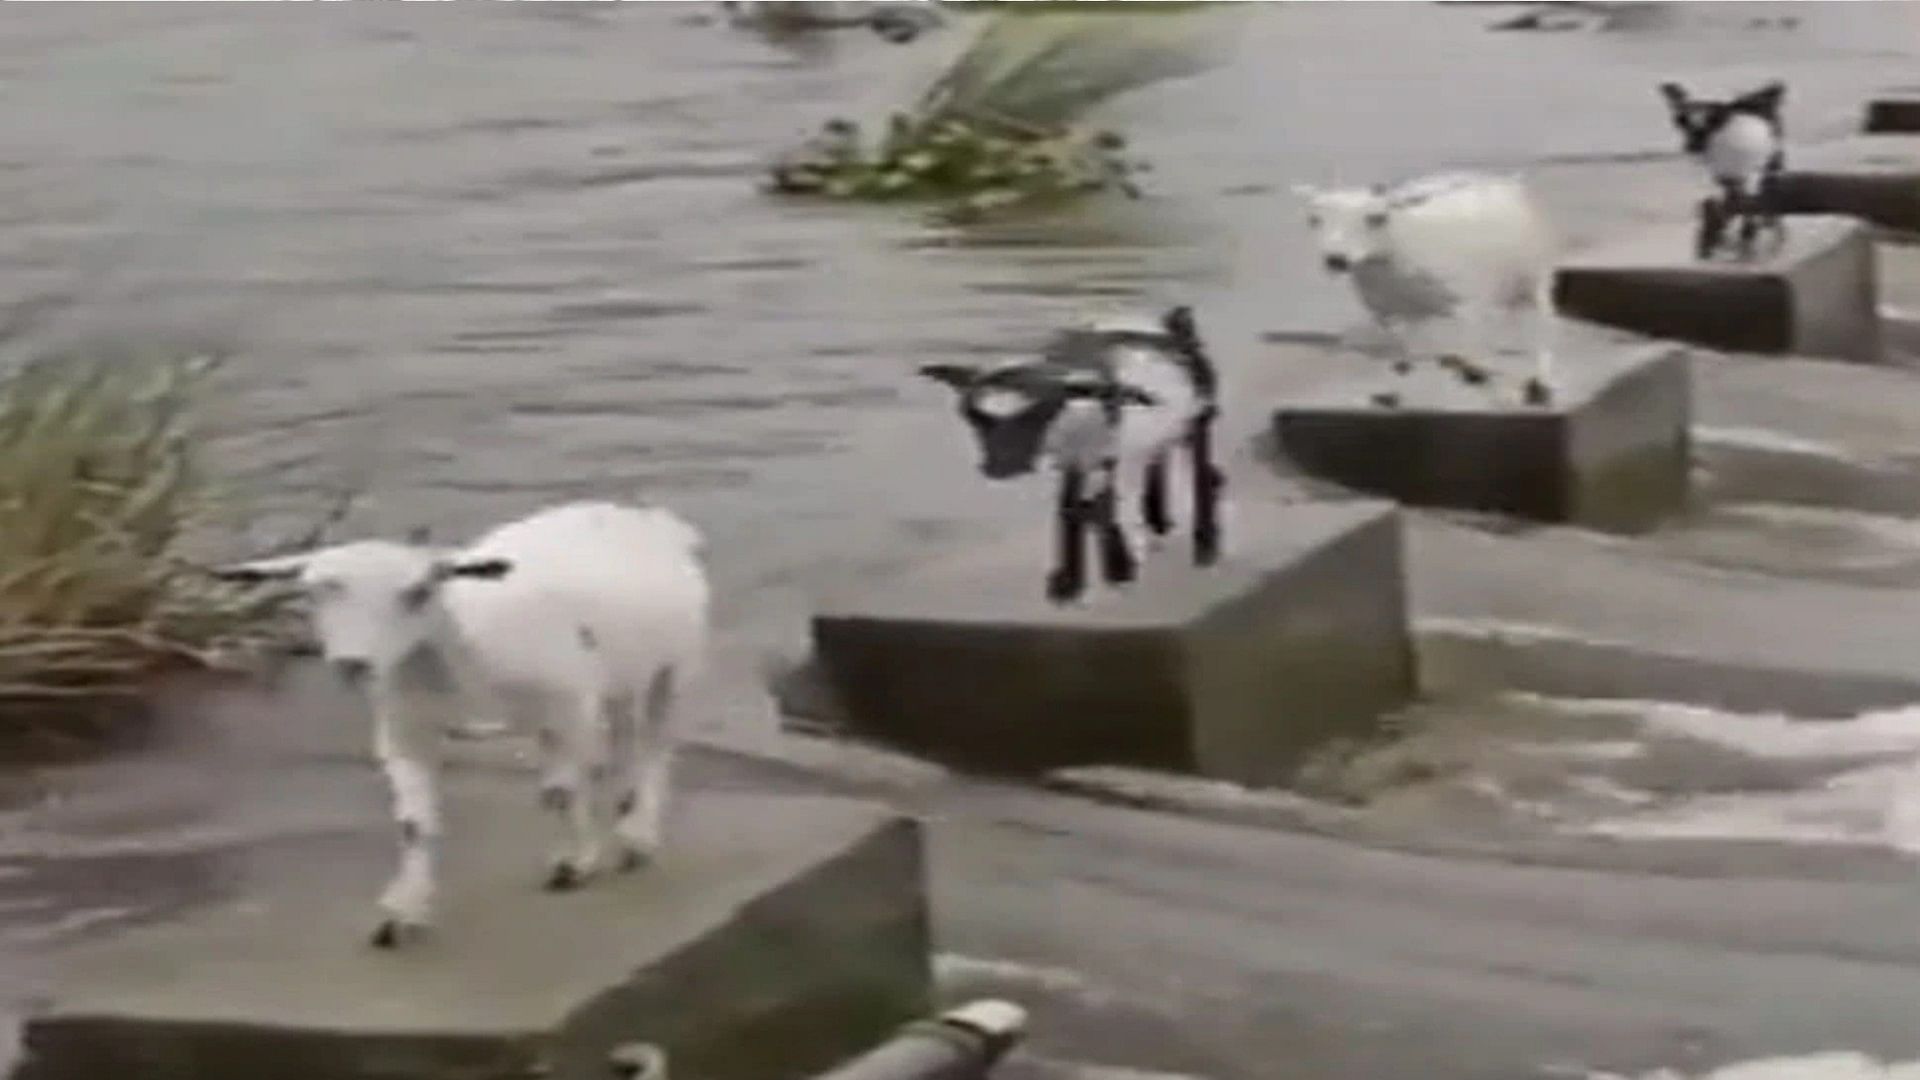 Trending: Goats video gave life lesson, by giving space to others you can go ahead